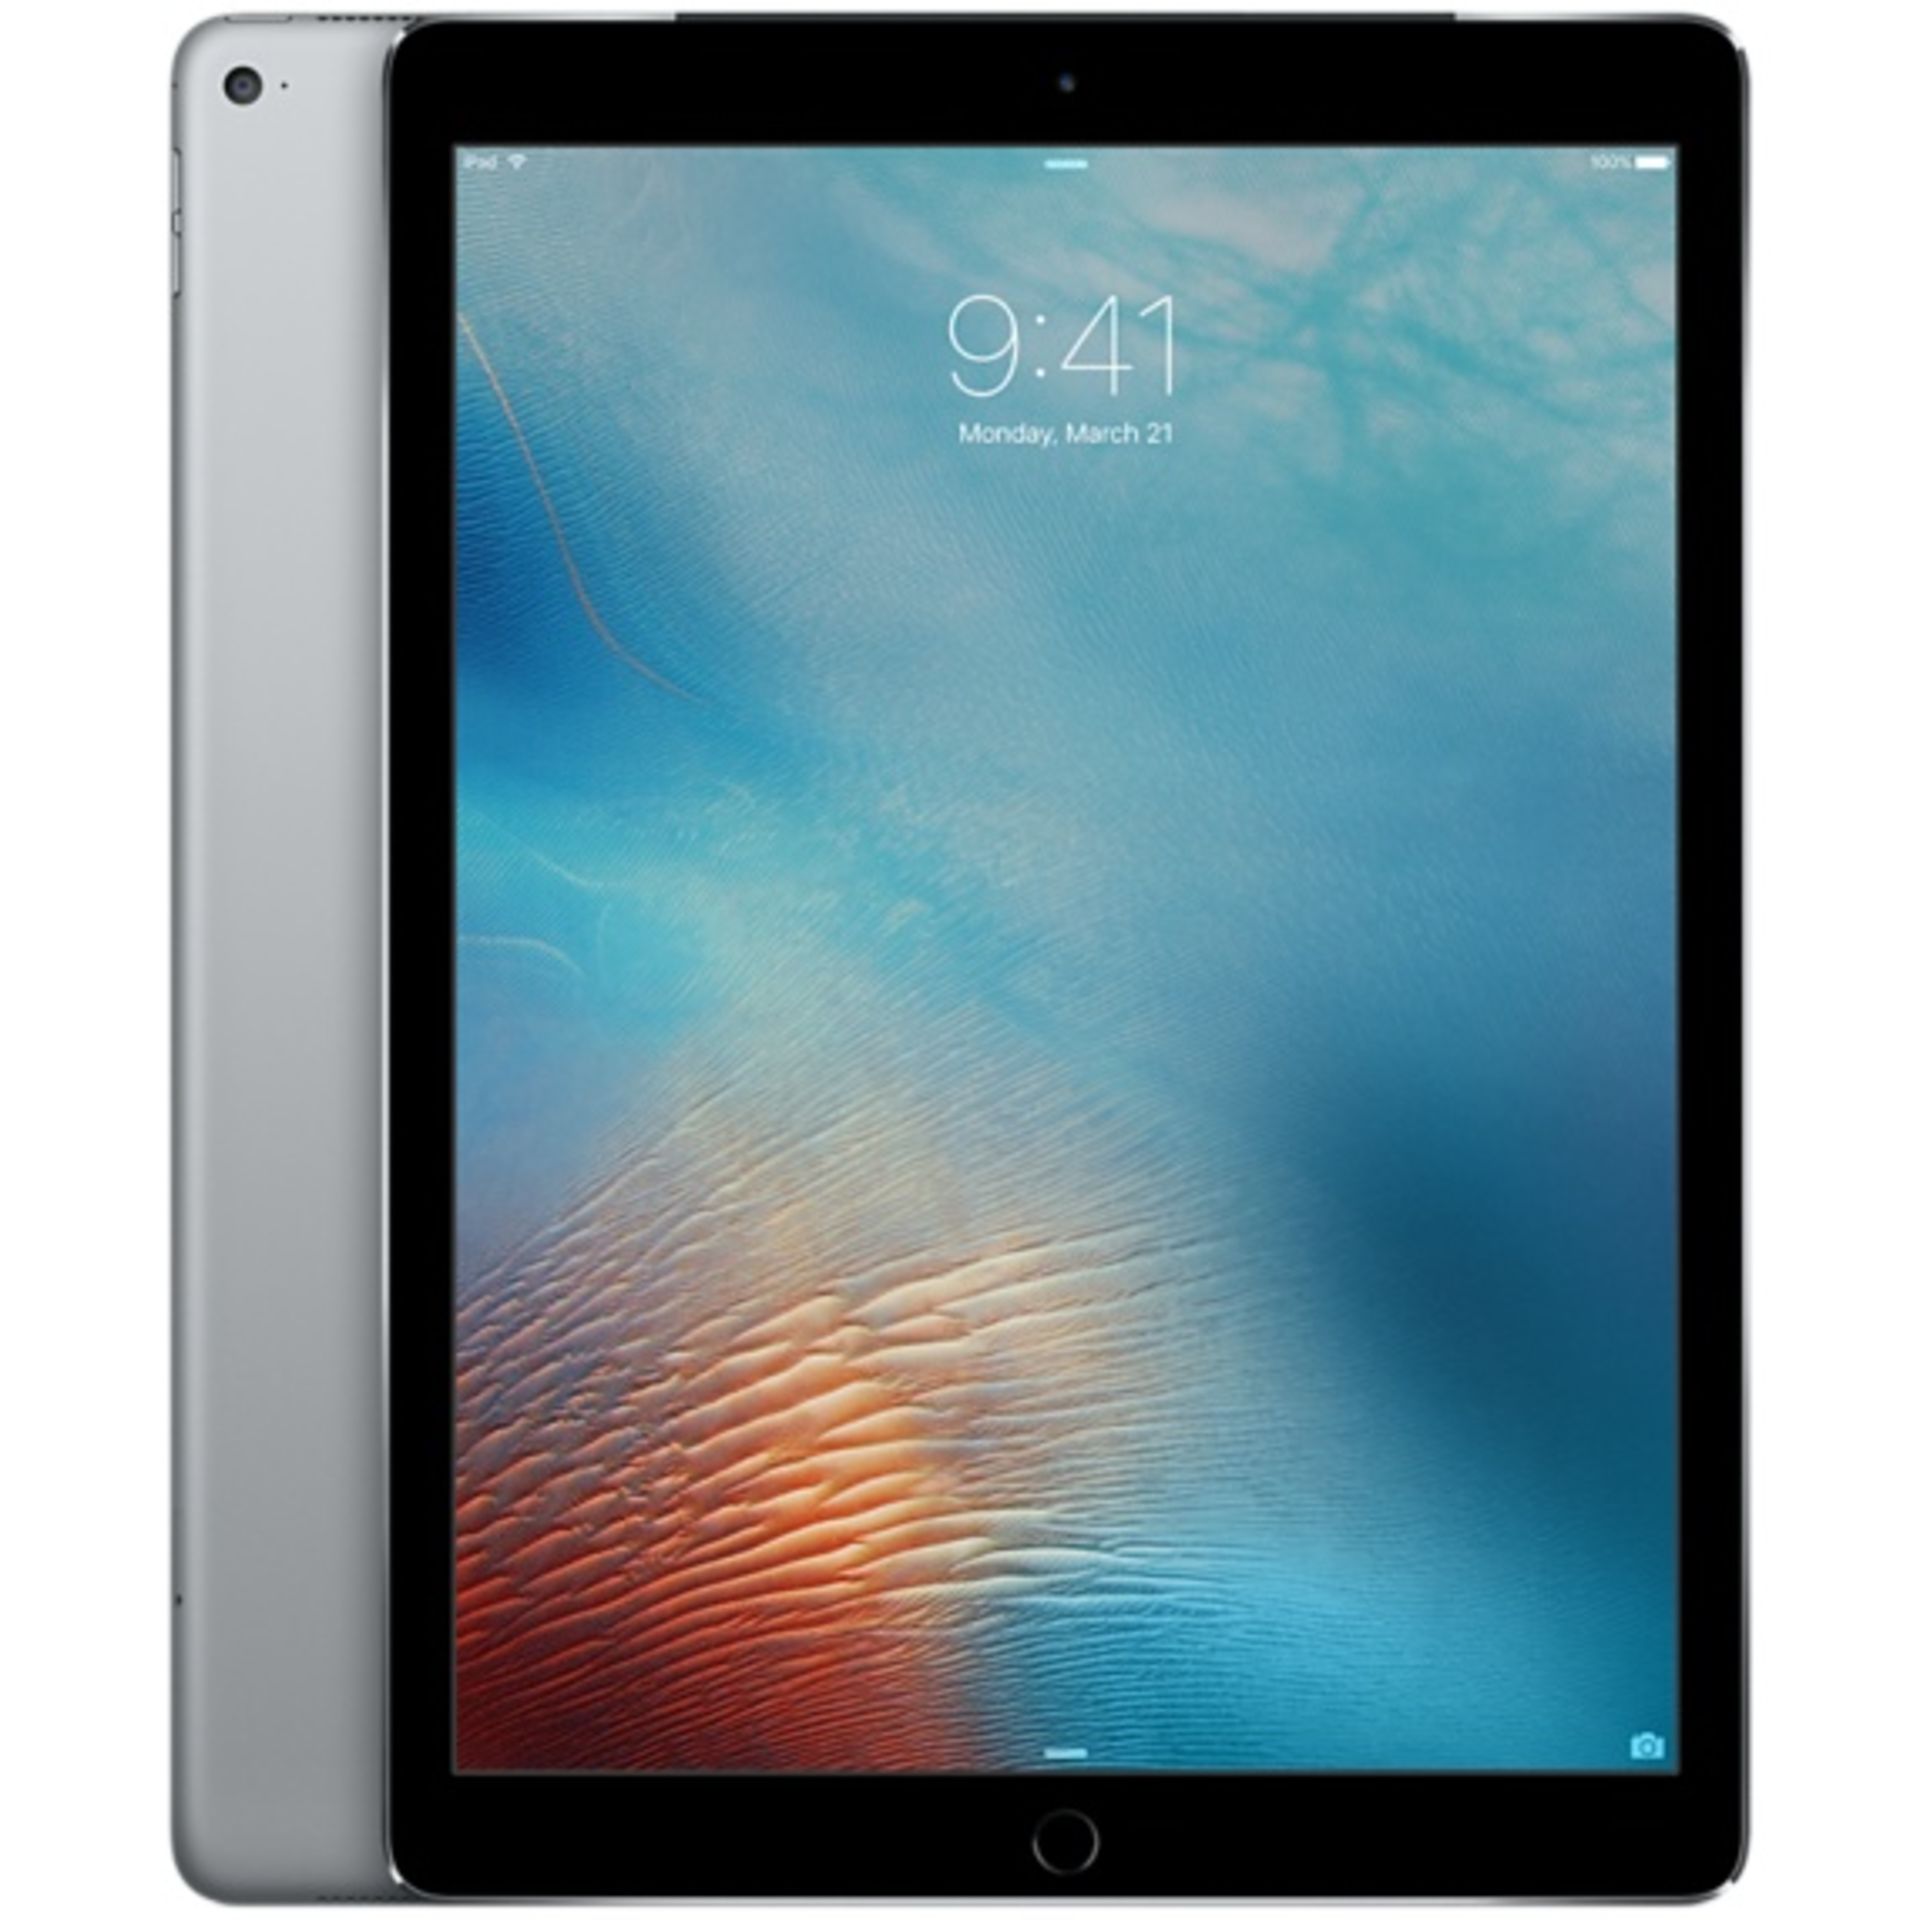 V Grade A Apple iPad Pro 12.9" Space Grey 32GB - Wi-Fi Only - with accessories and original box